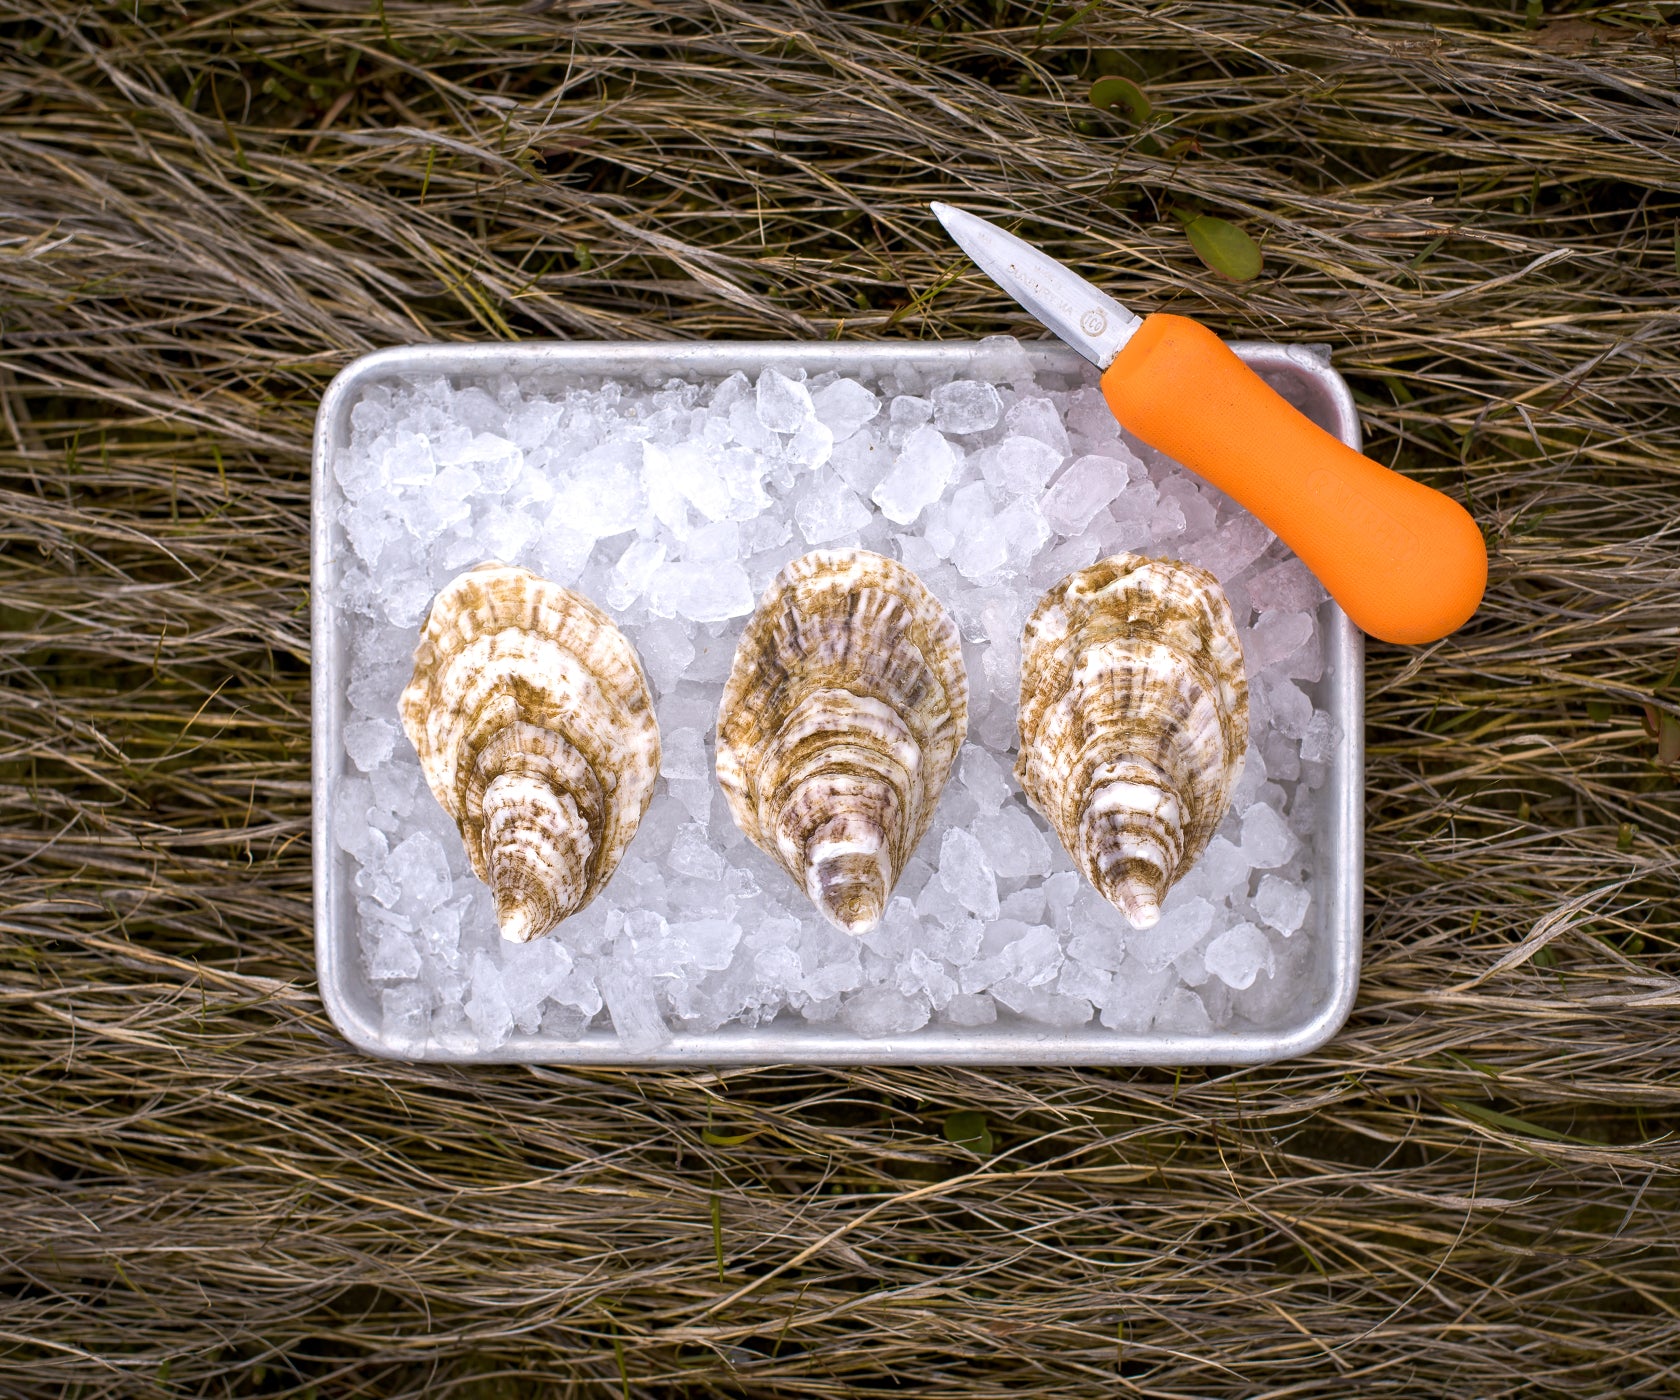 Bass Point Oysters from Nantucket, MA